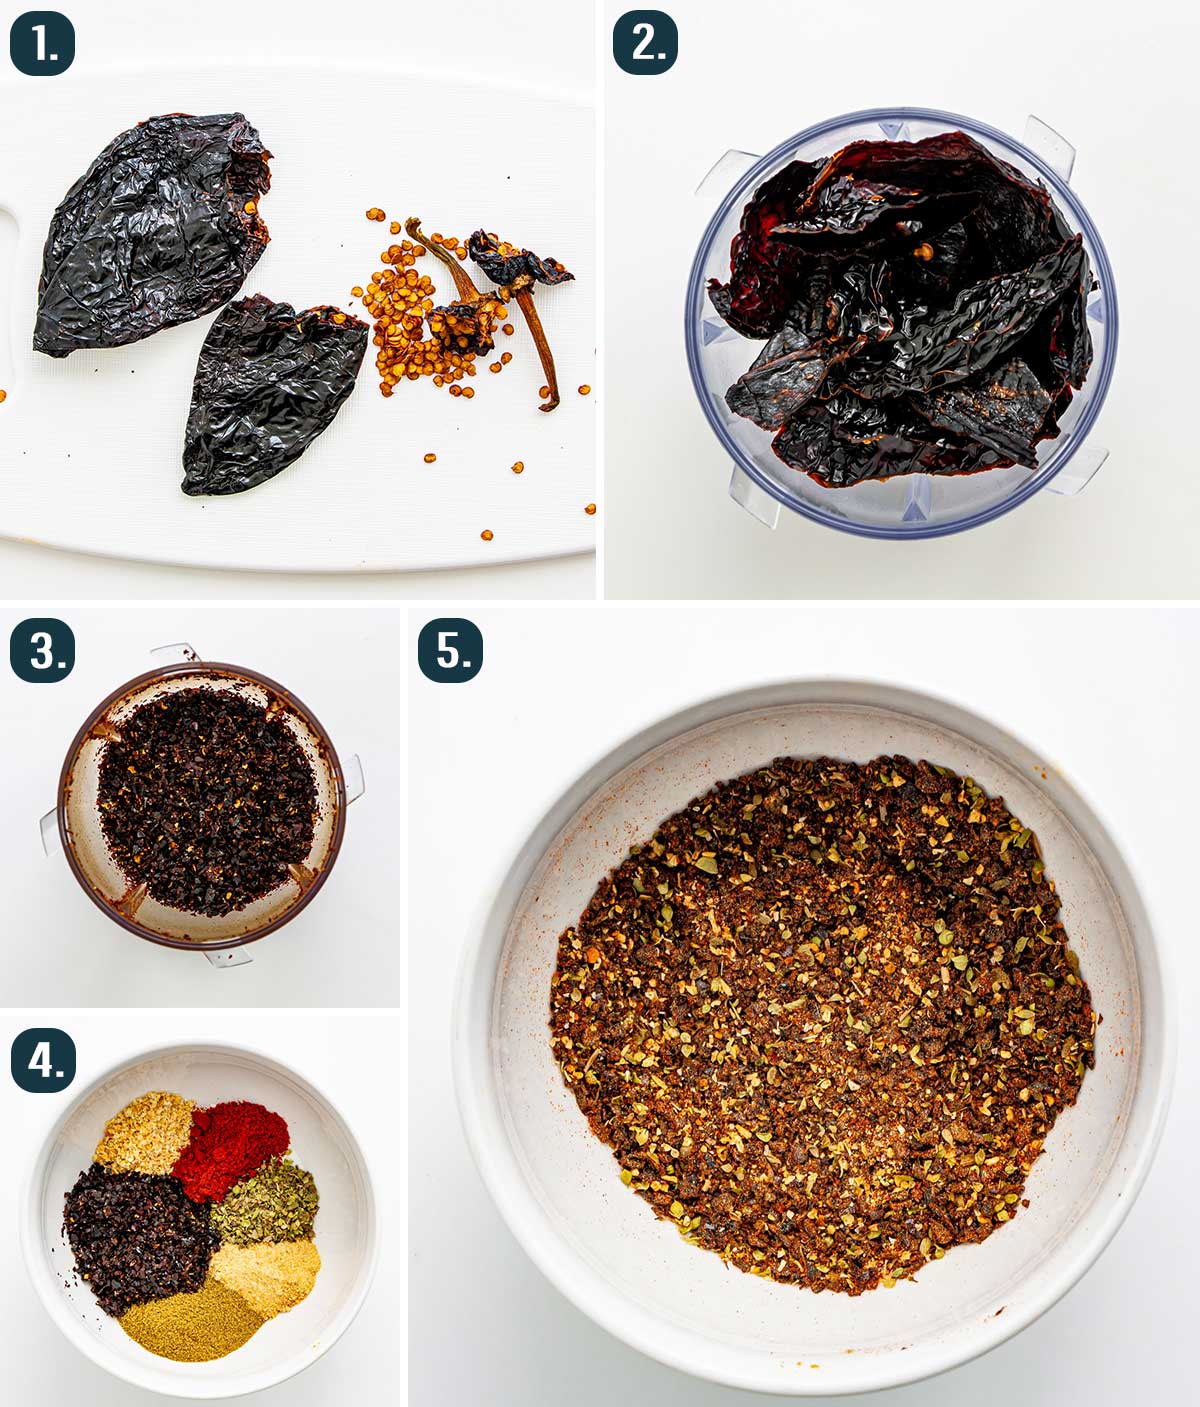 detailed process shots showing how to make chili powder from scratch